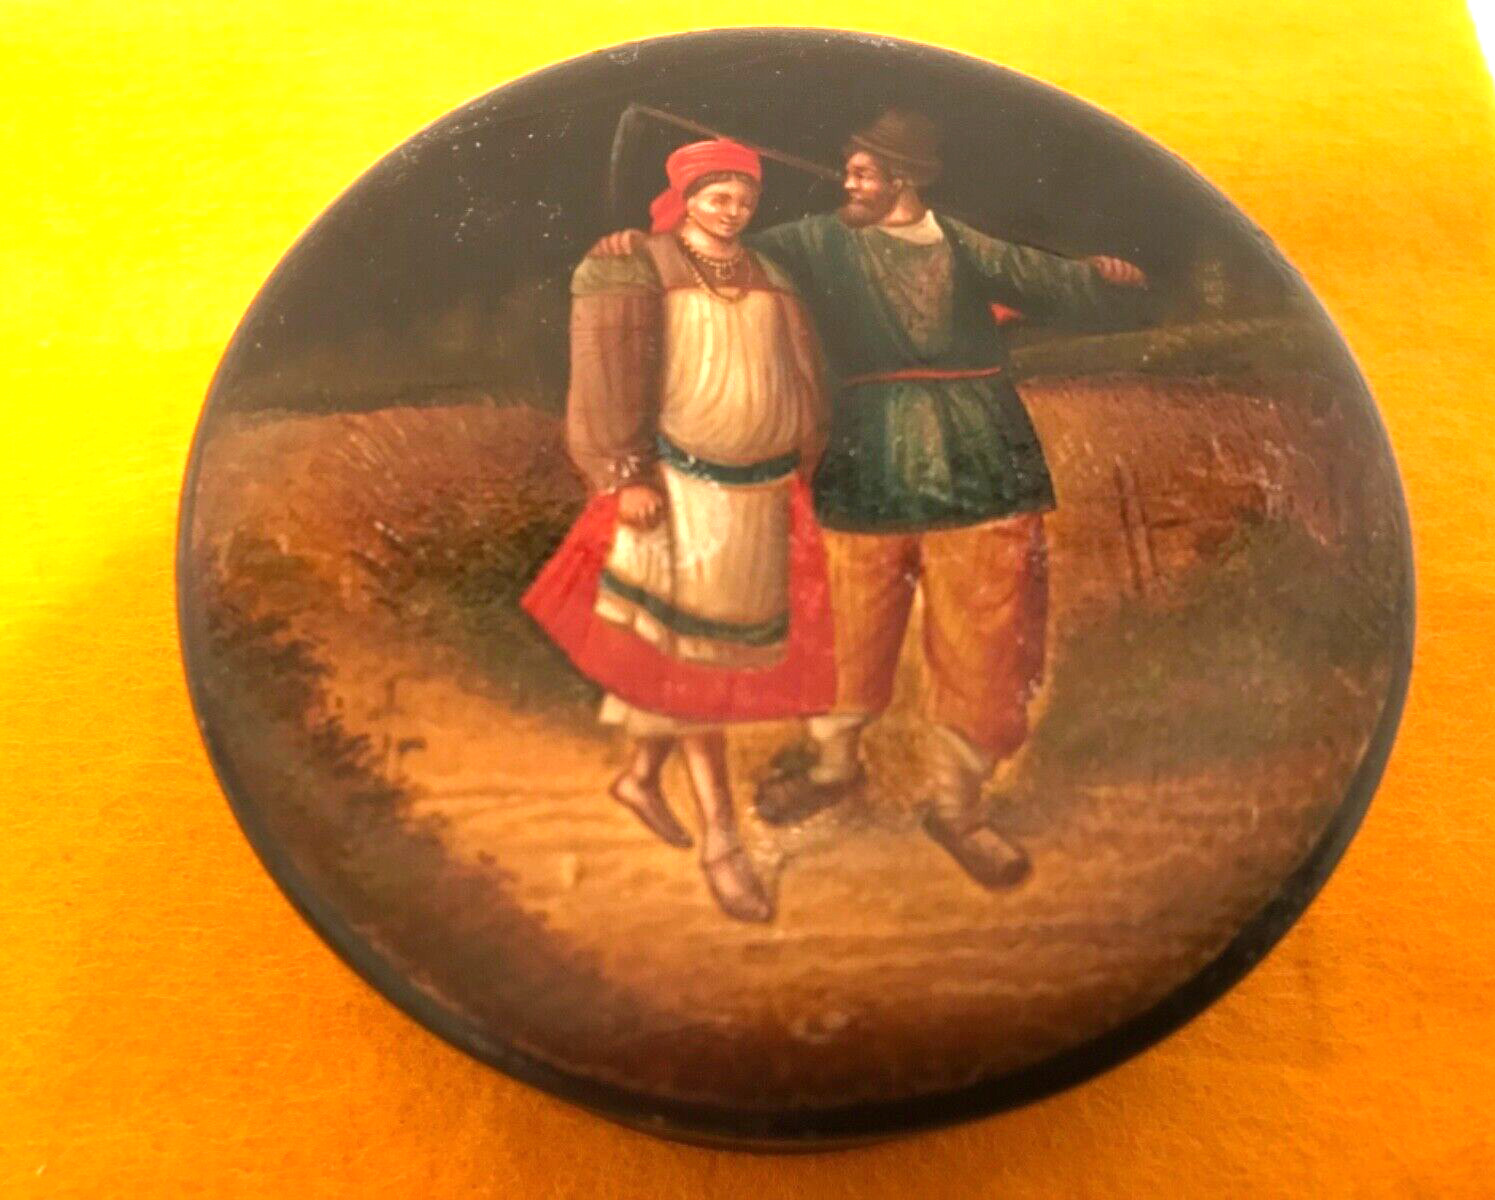 🔥Antique 1850’s Lukutin Vishnyakov Imperial Russia painting on lacquer box